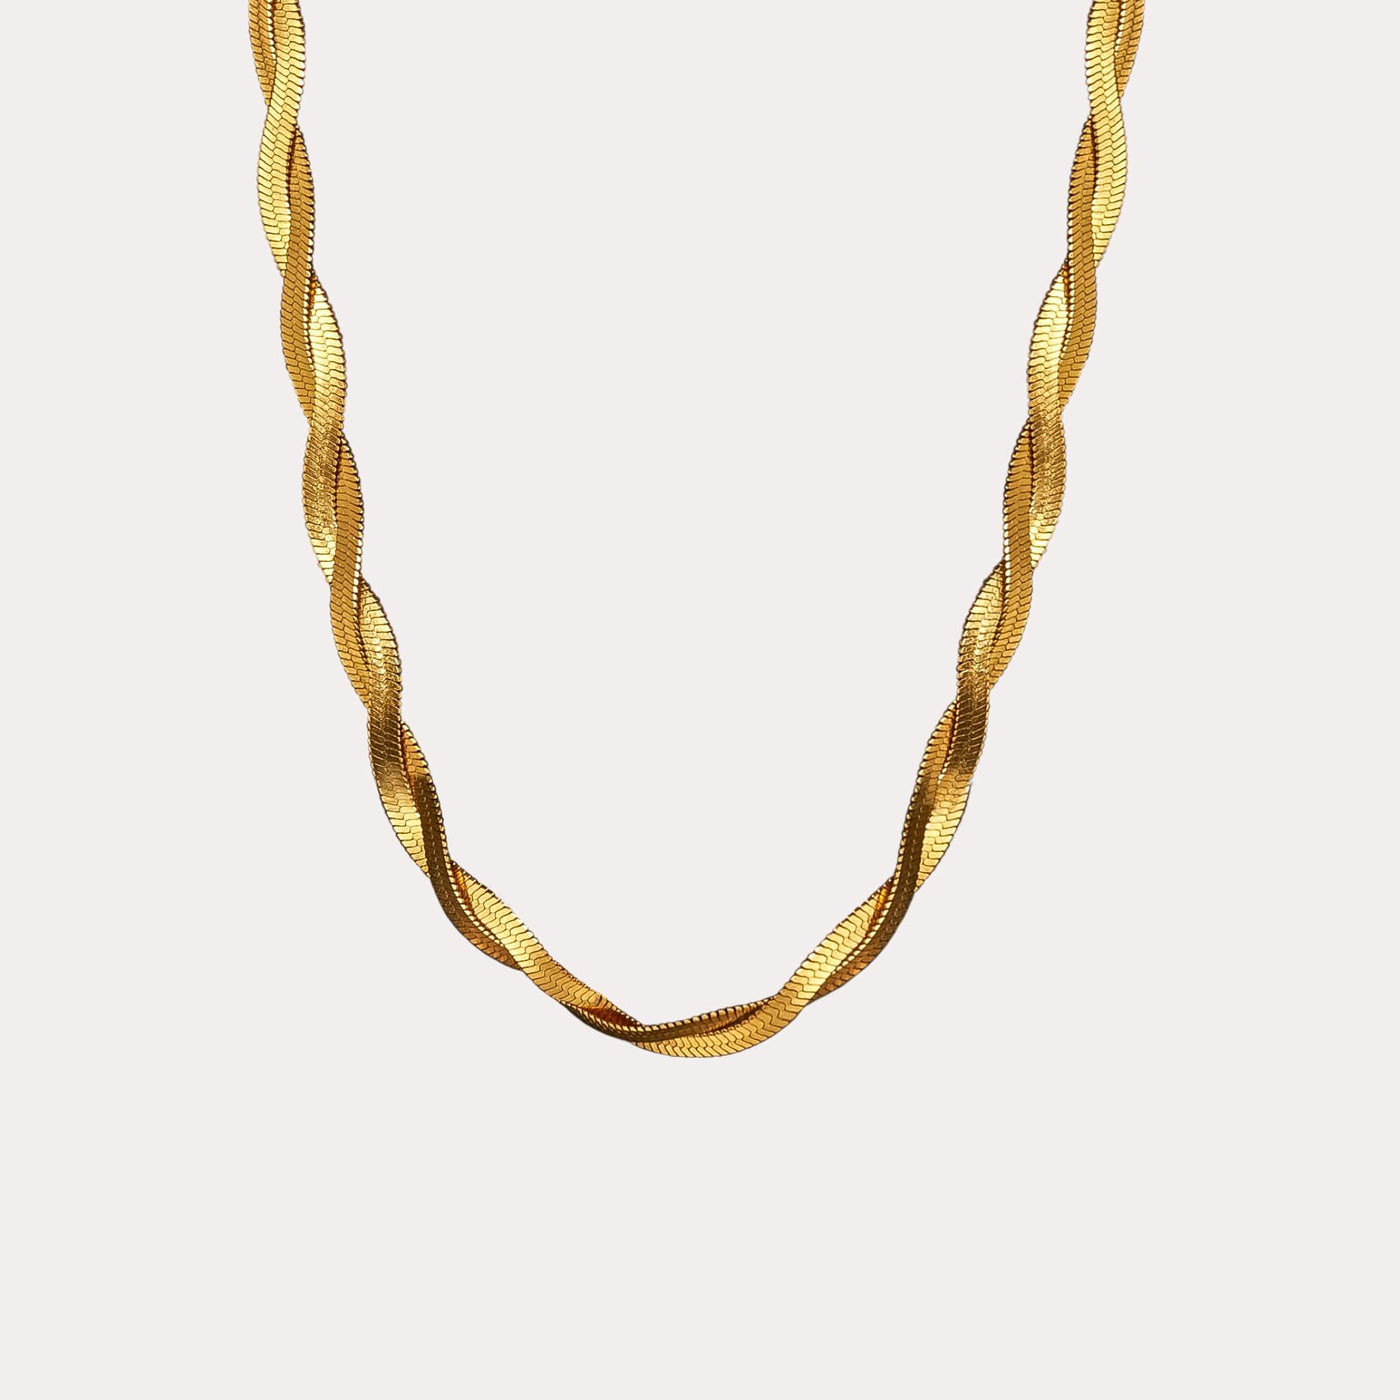 Woven Snake Chain Necklace